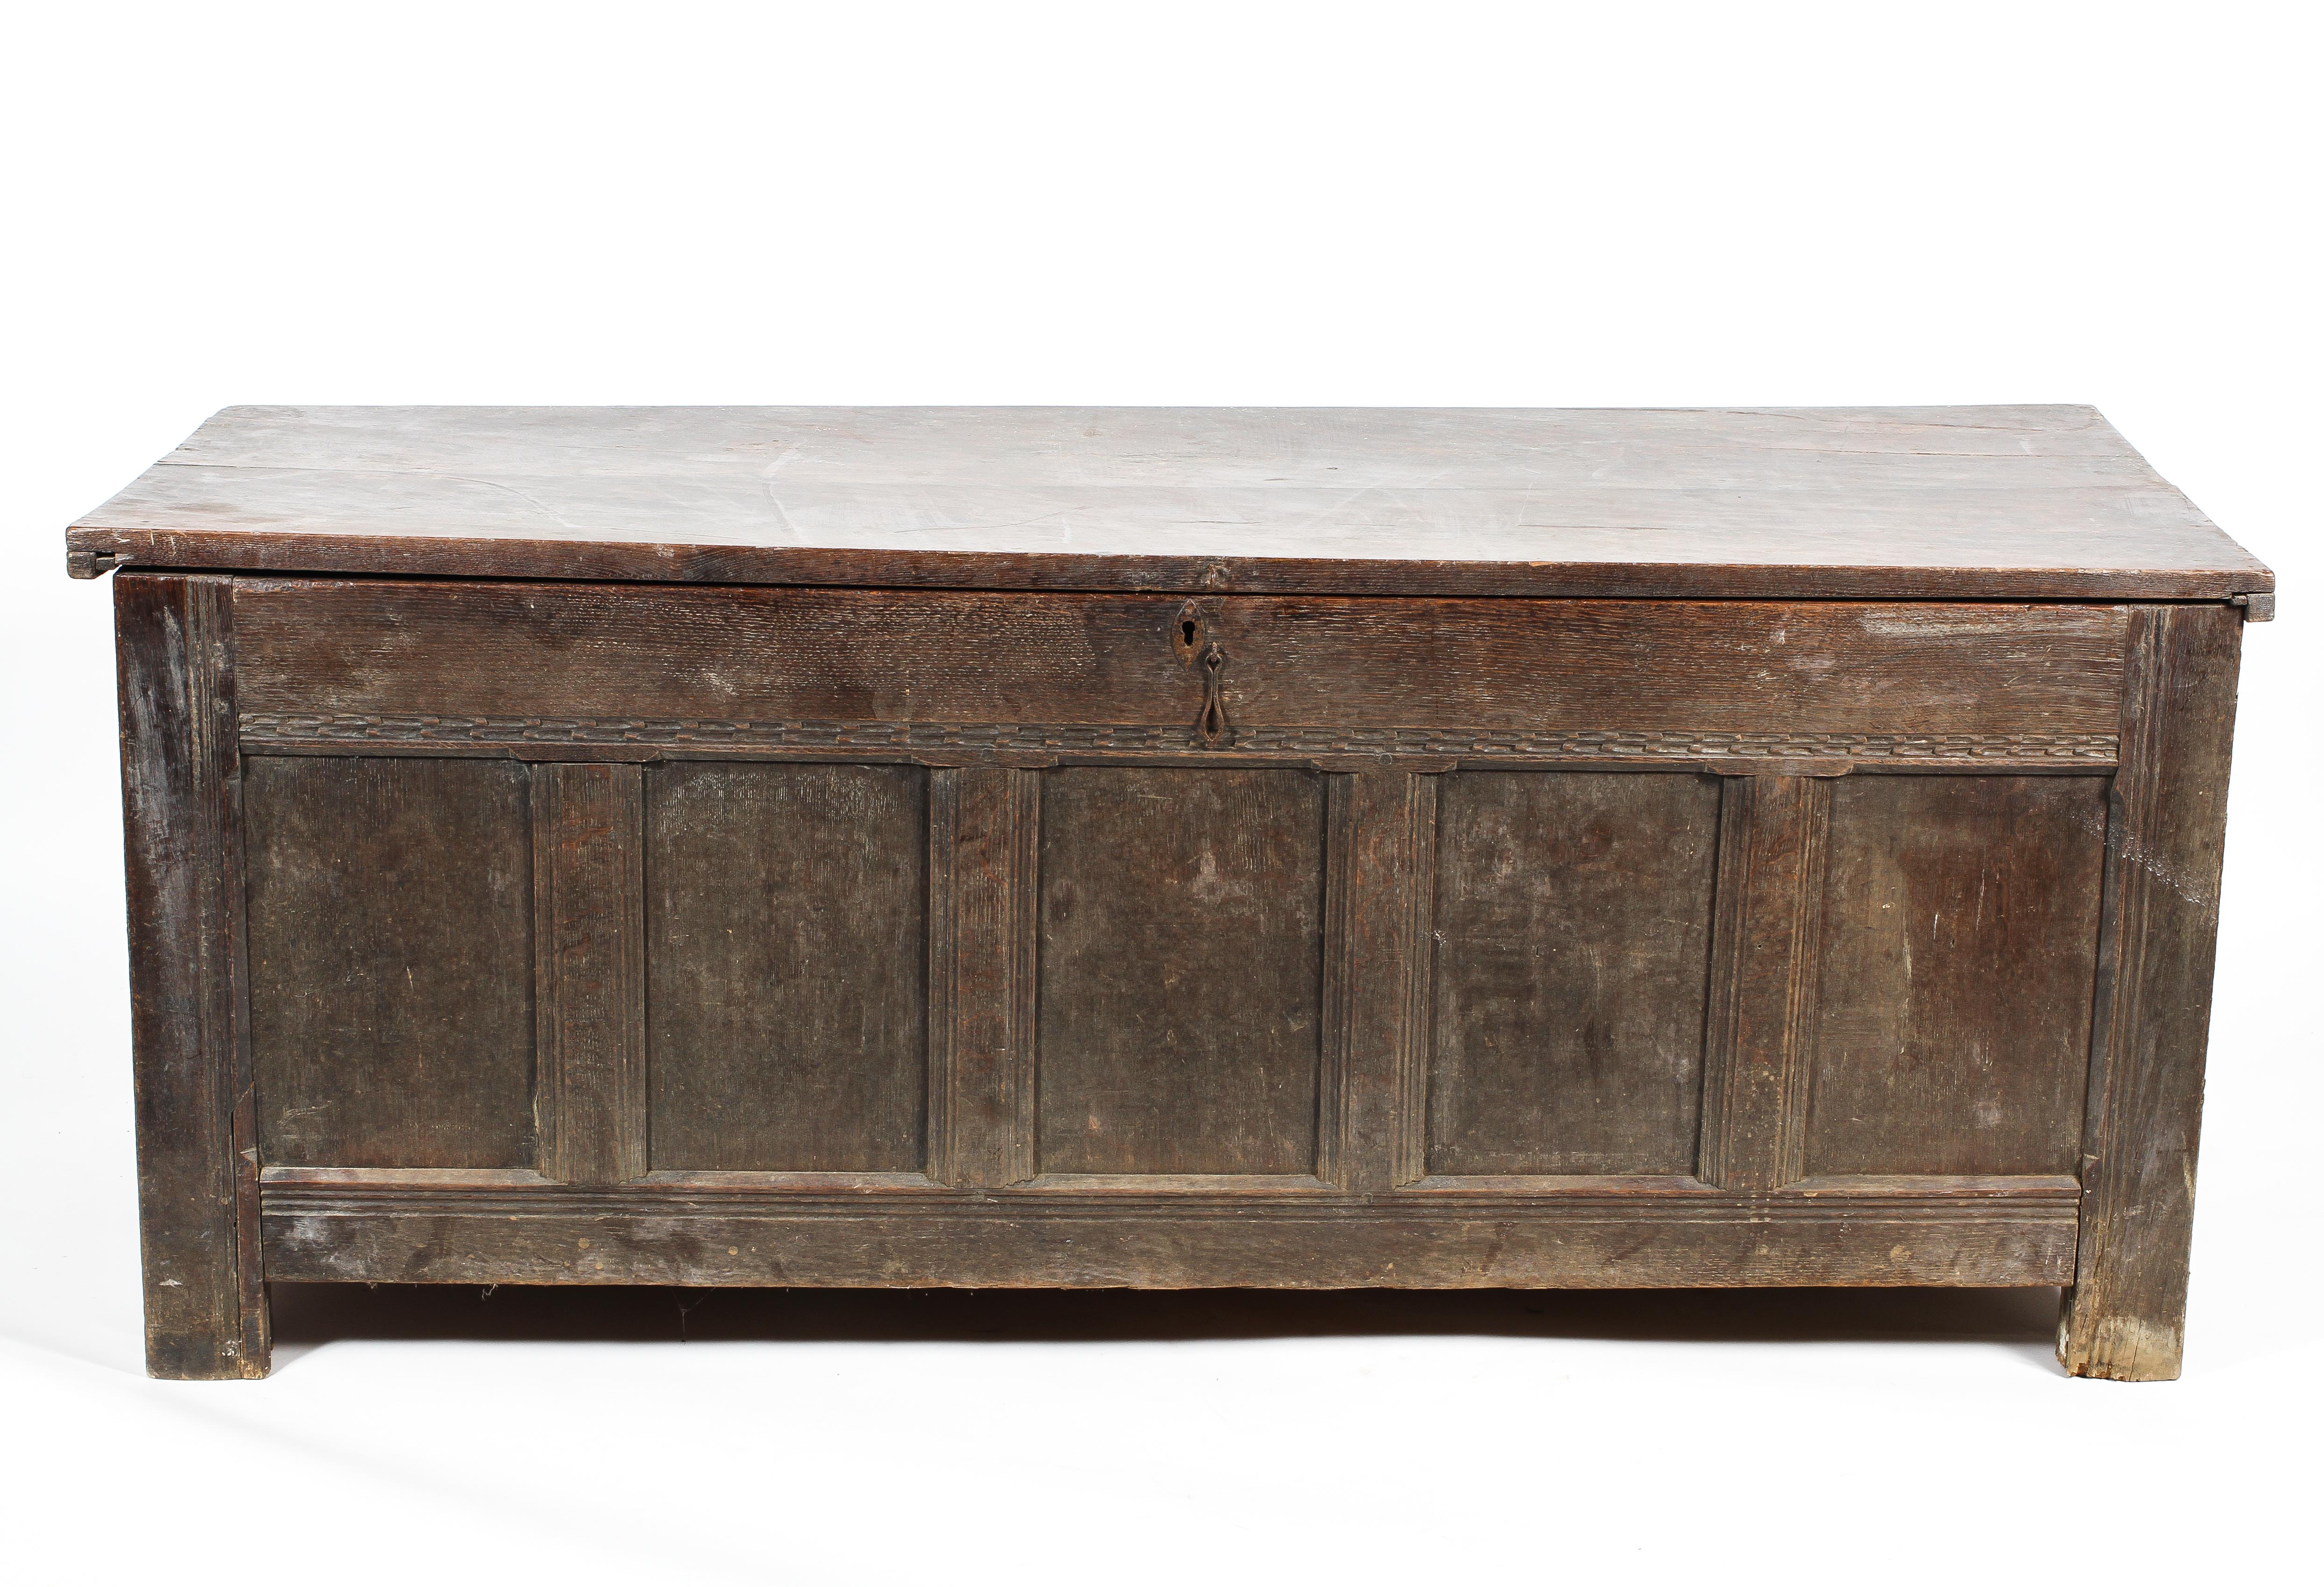 An 18th century oak paneled coffer of large proportion. - Image 3 of 4